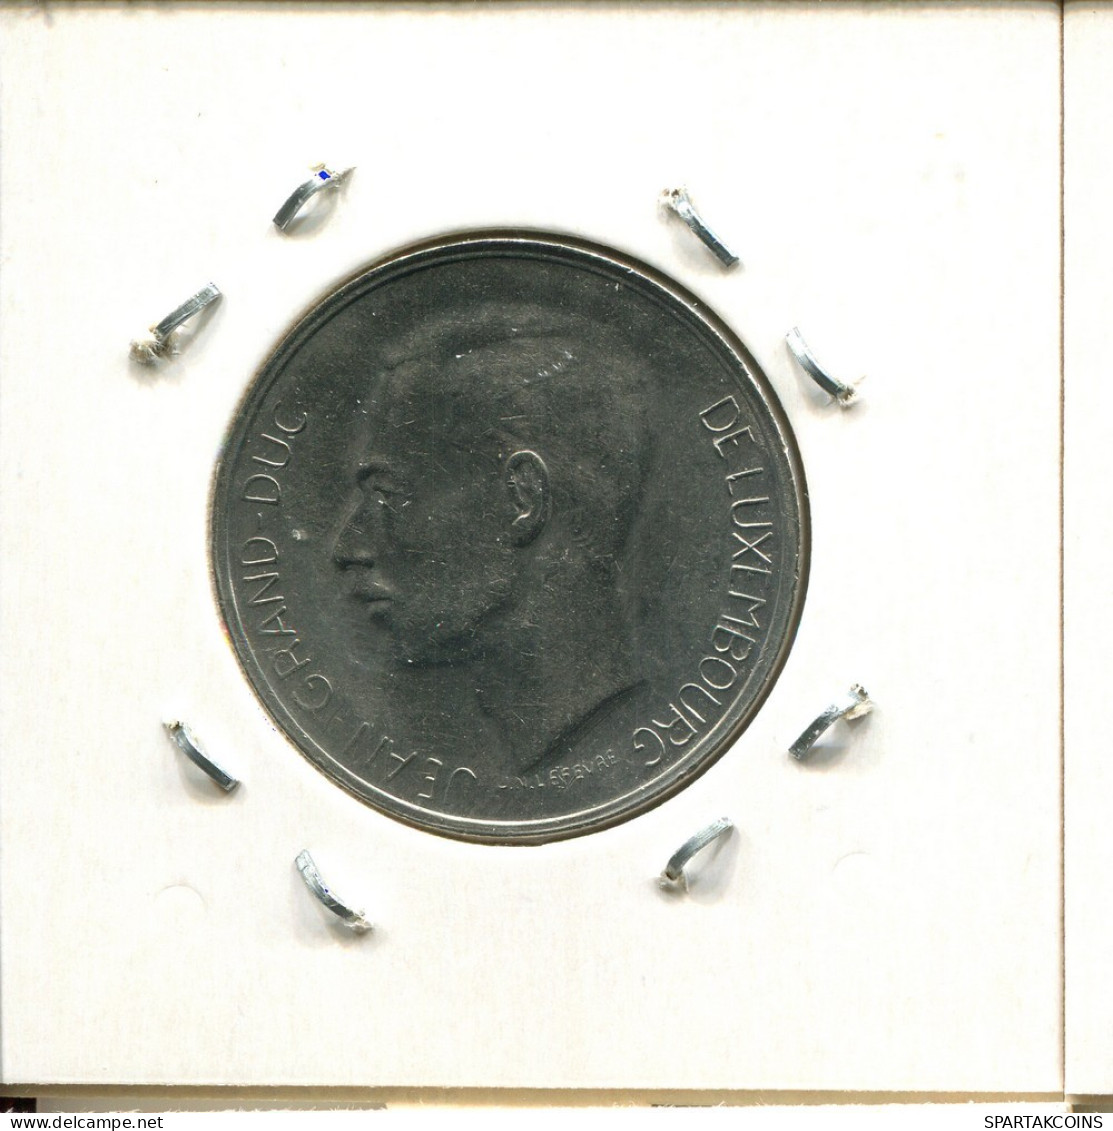 10 FRANCS 1972 LUXEMBURG LUXEMBOURG Münze #AT239.D.A - Luxembourg